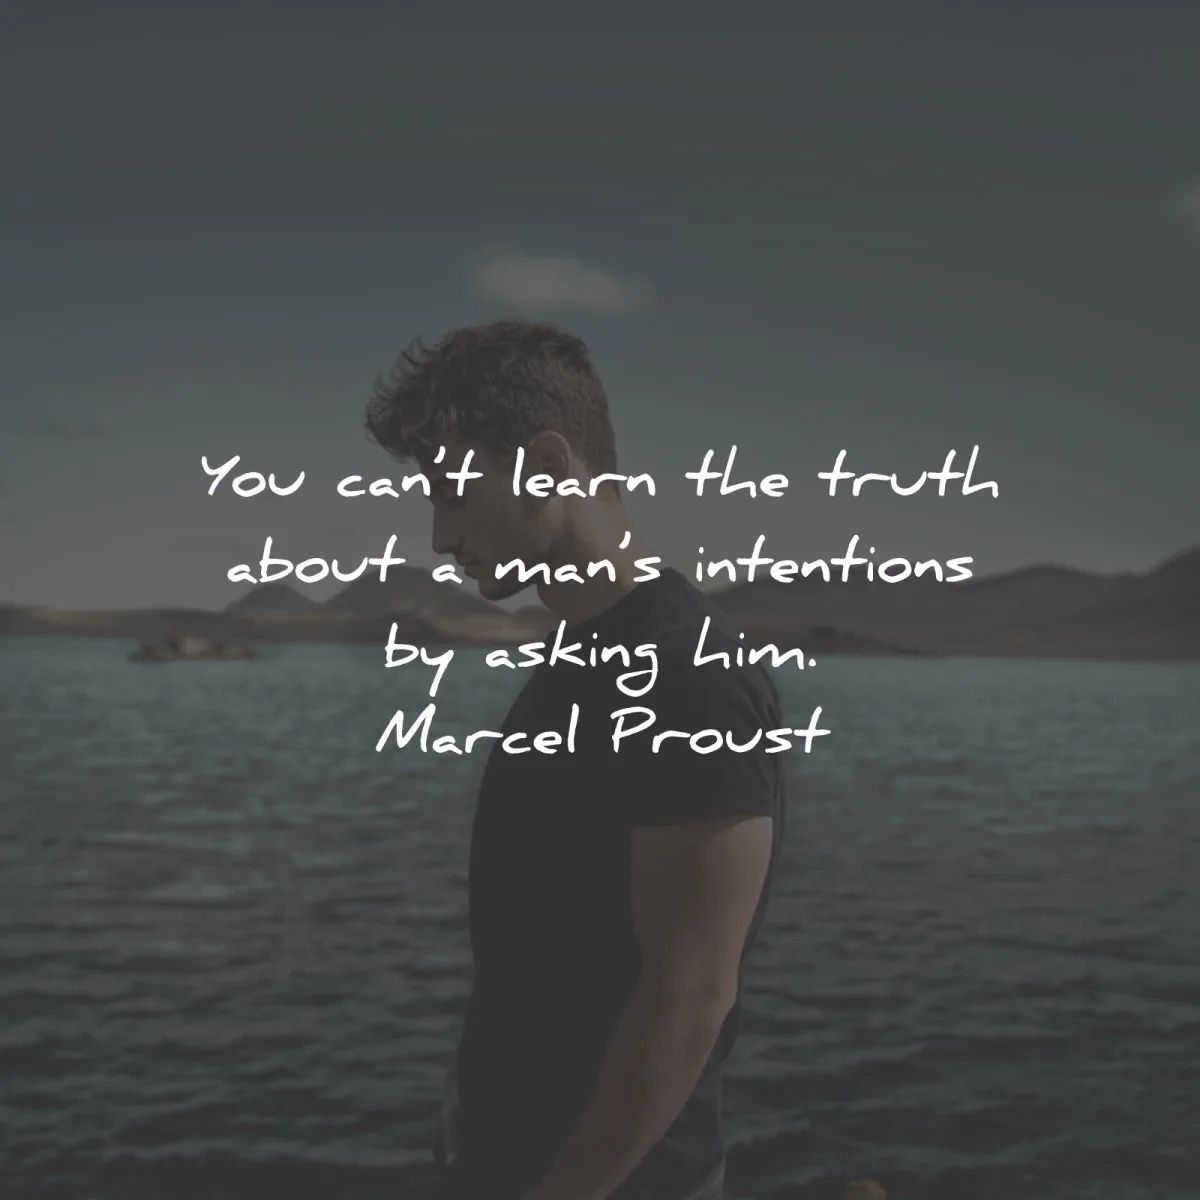 marcel proust quotes cant learn truth intentions asking him wisdom